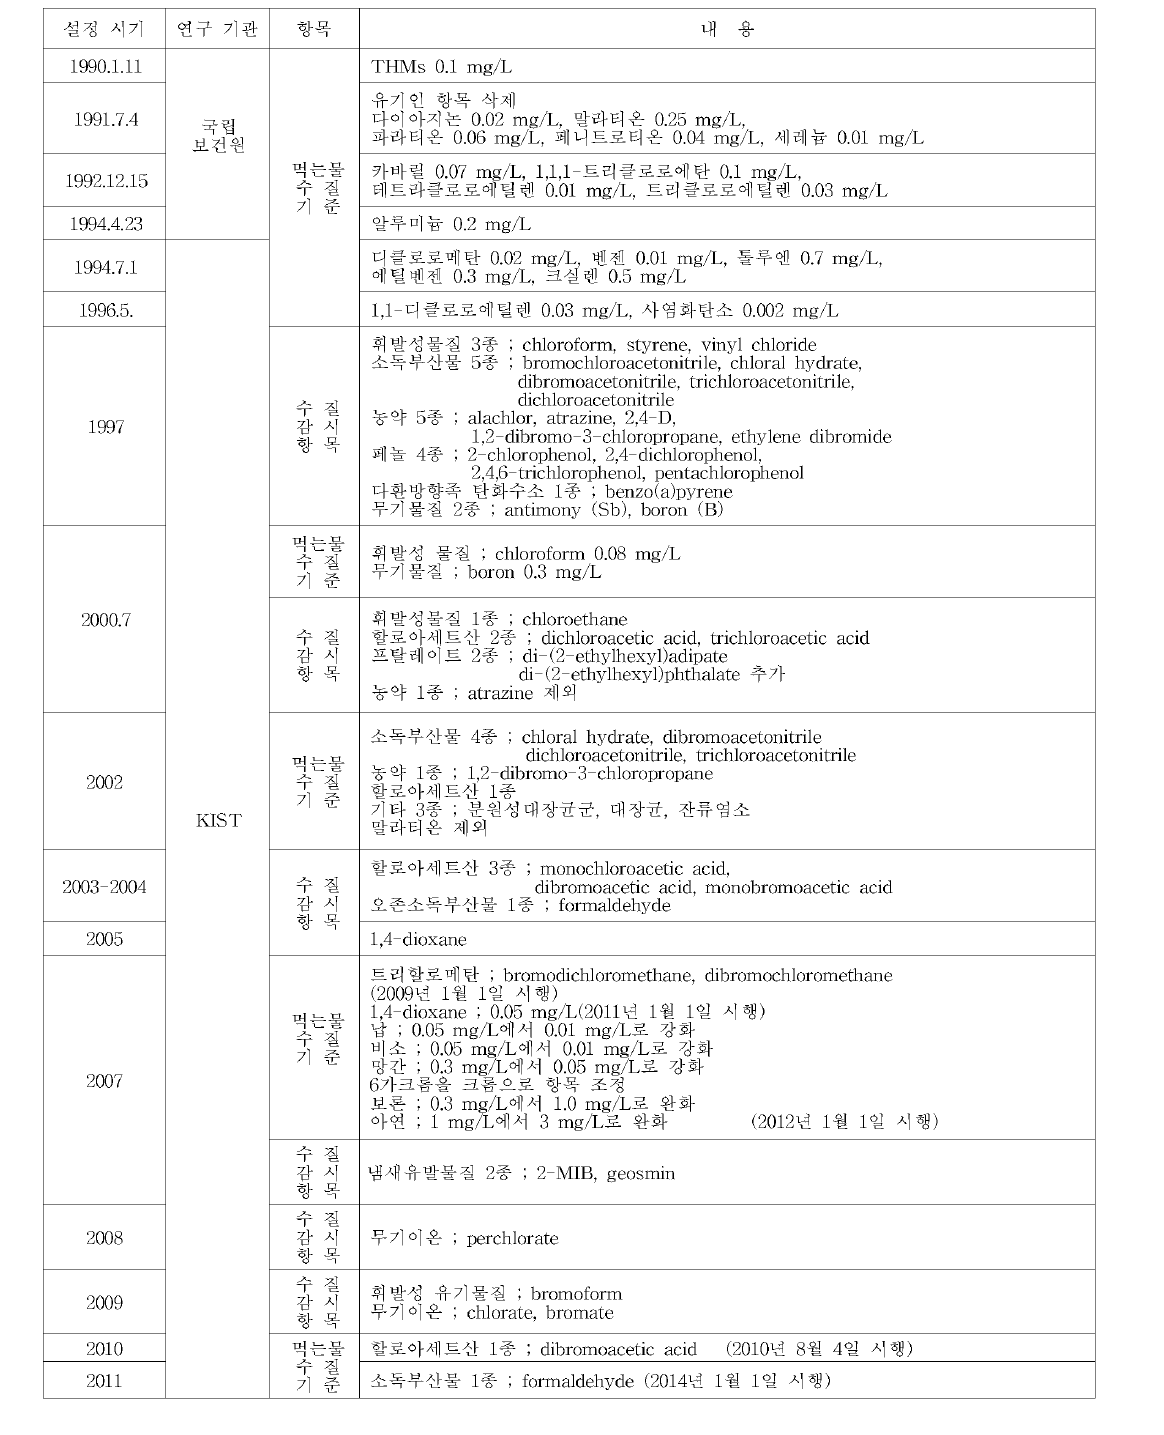 Recommenda仕on values and standard or observa仕on compounds of drinking water according to the results of the research from 1989 to 2012 in Korea